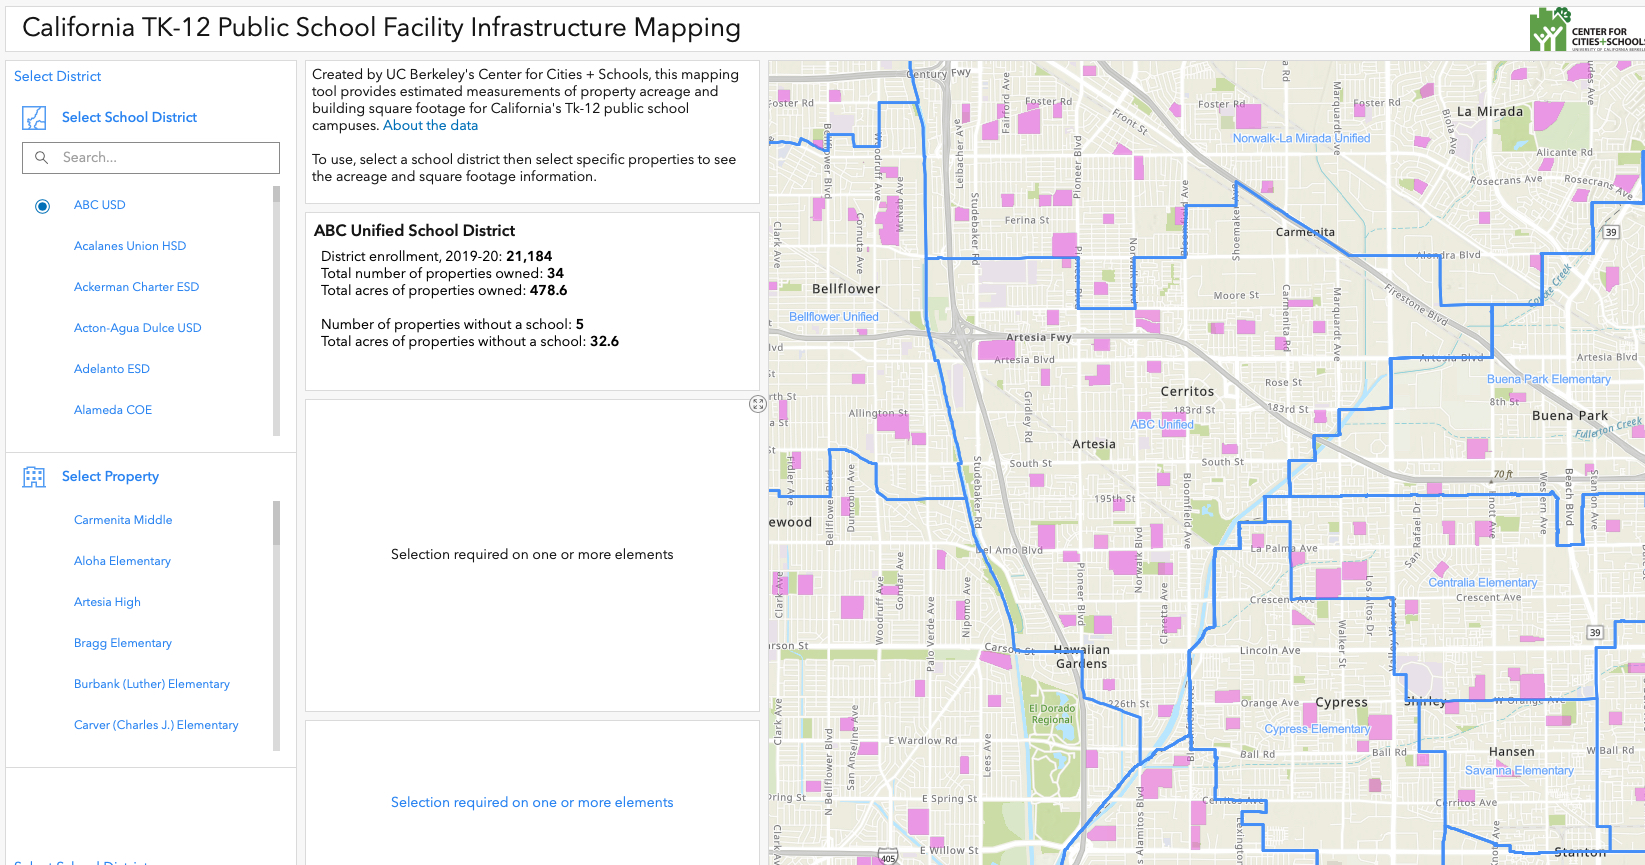 CA Infrastructure mapping tool screenshot